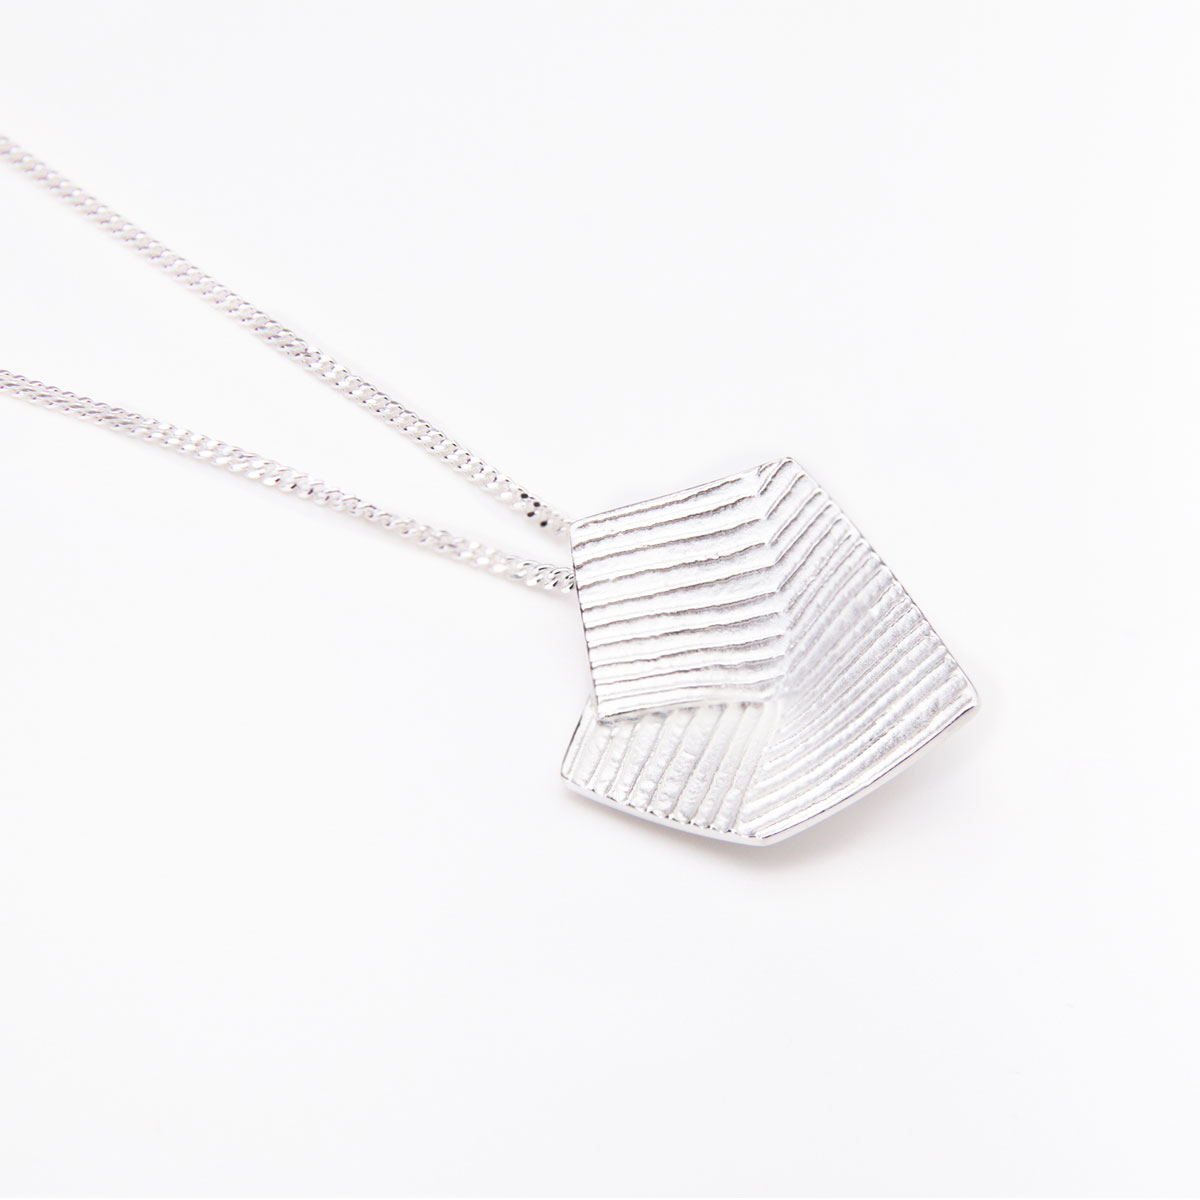 ‘Lines in Motion’ Silver Pendant, Large